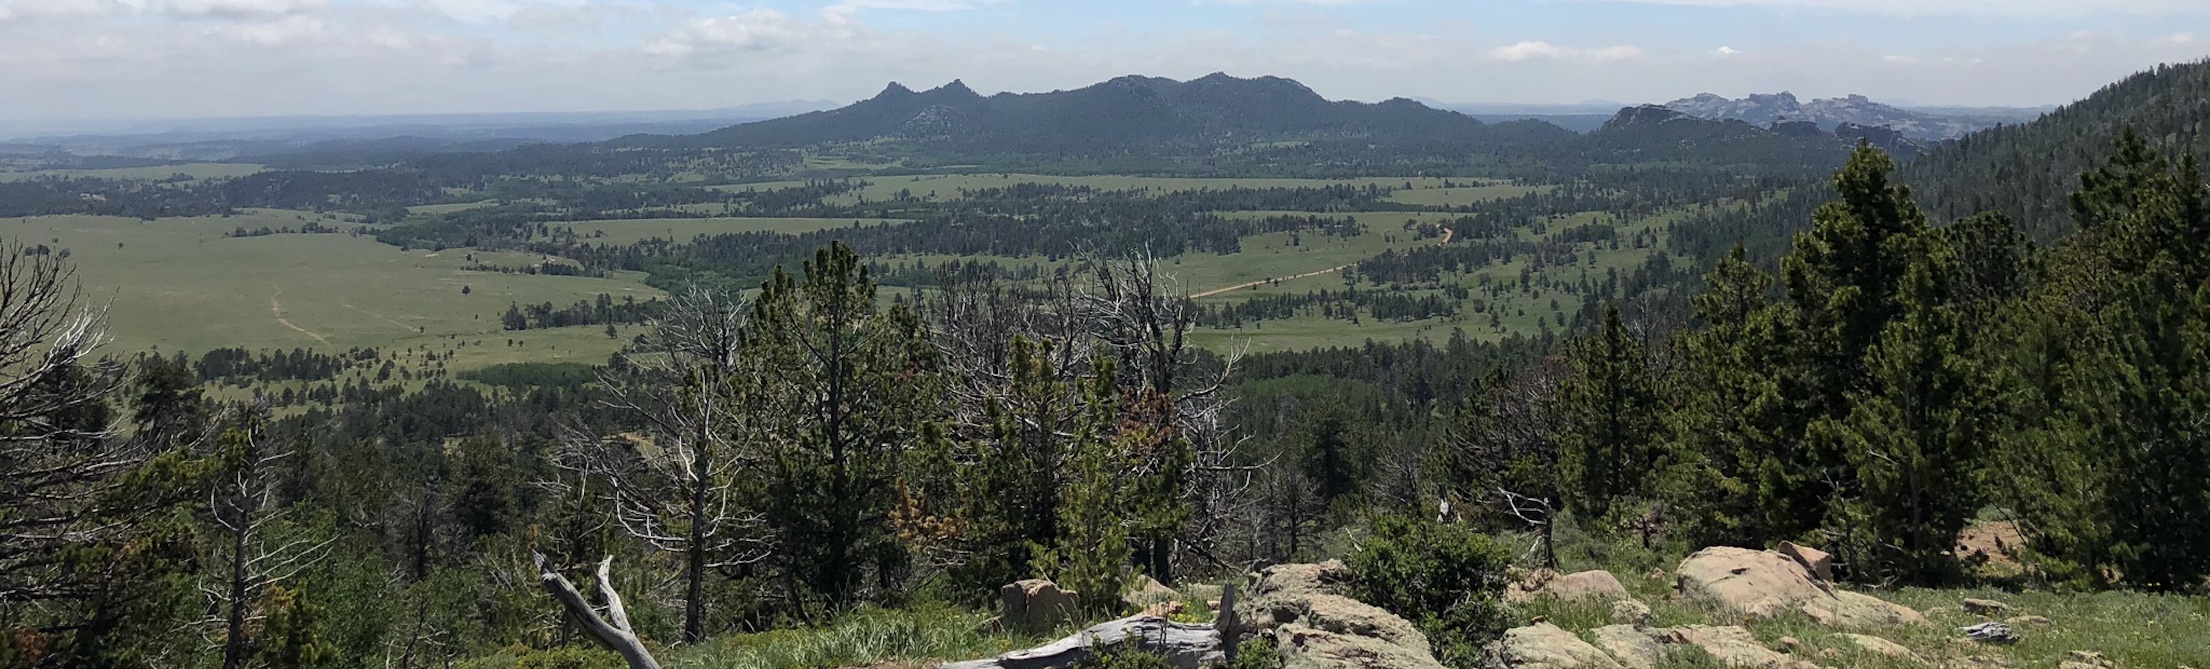 Photograph of Pole Mountain forest and hills.